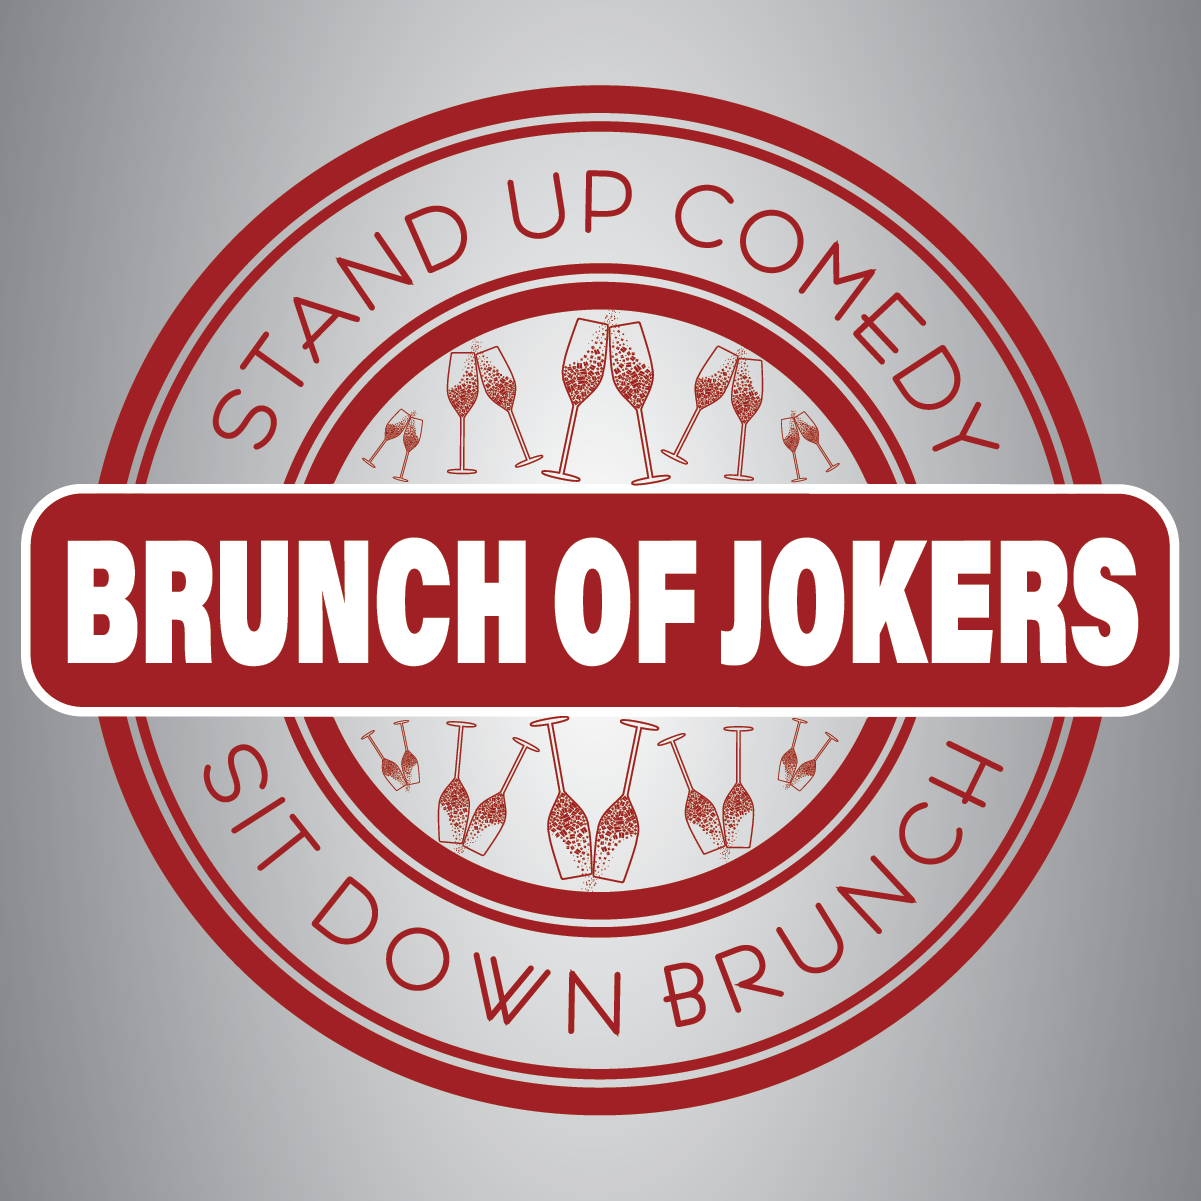 Sunday Brunch and Stand Up Comedy